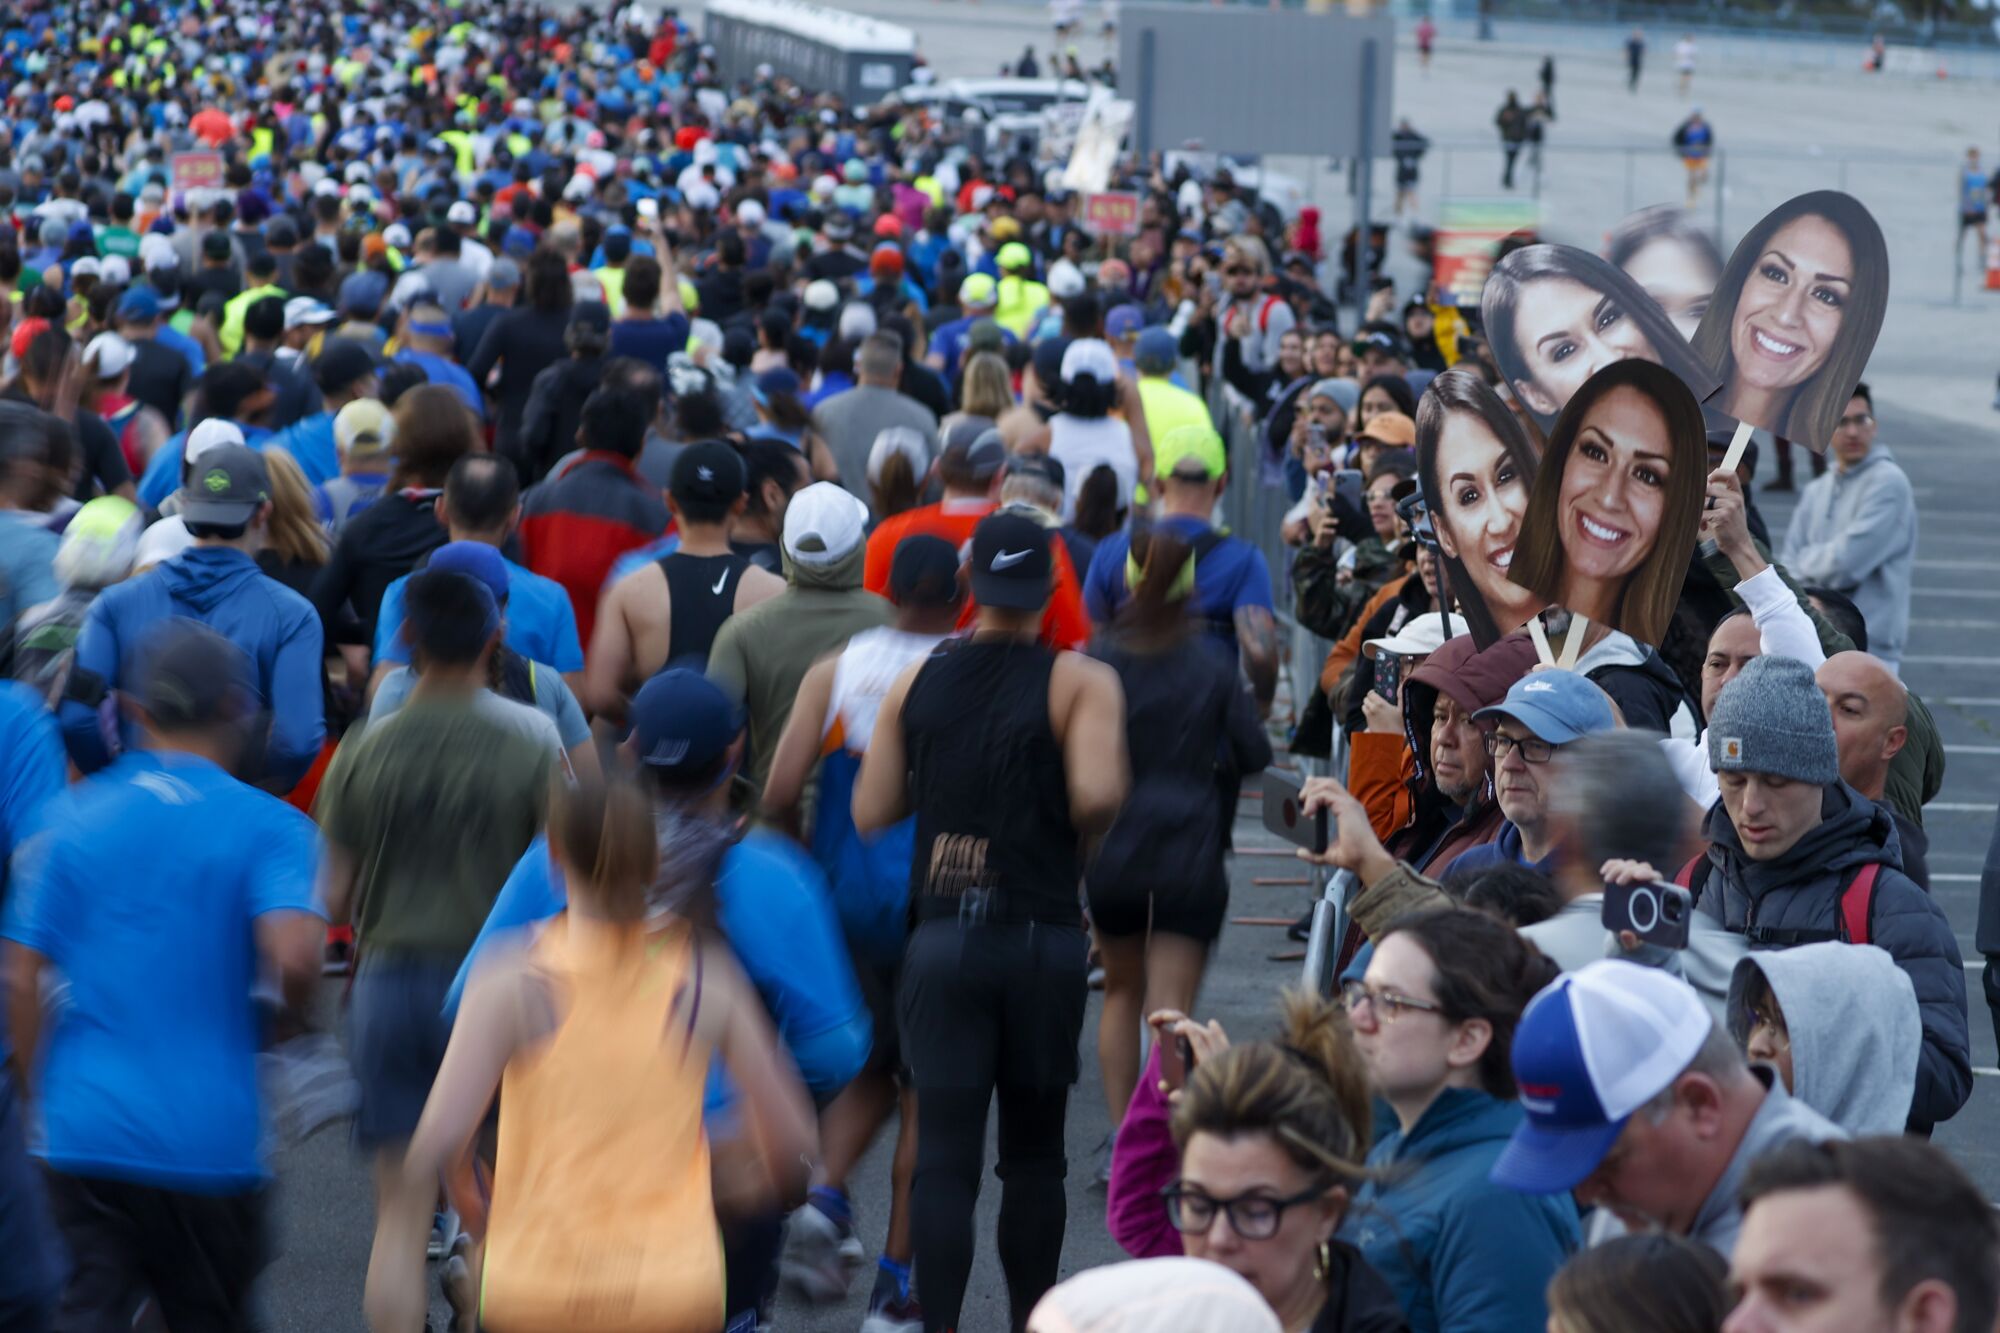 Marathon runners pass spectators, including one holding cardboard cutouts of a runner's face.